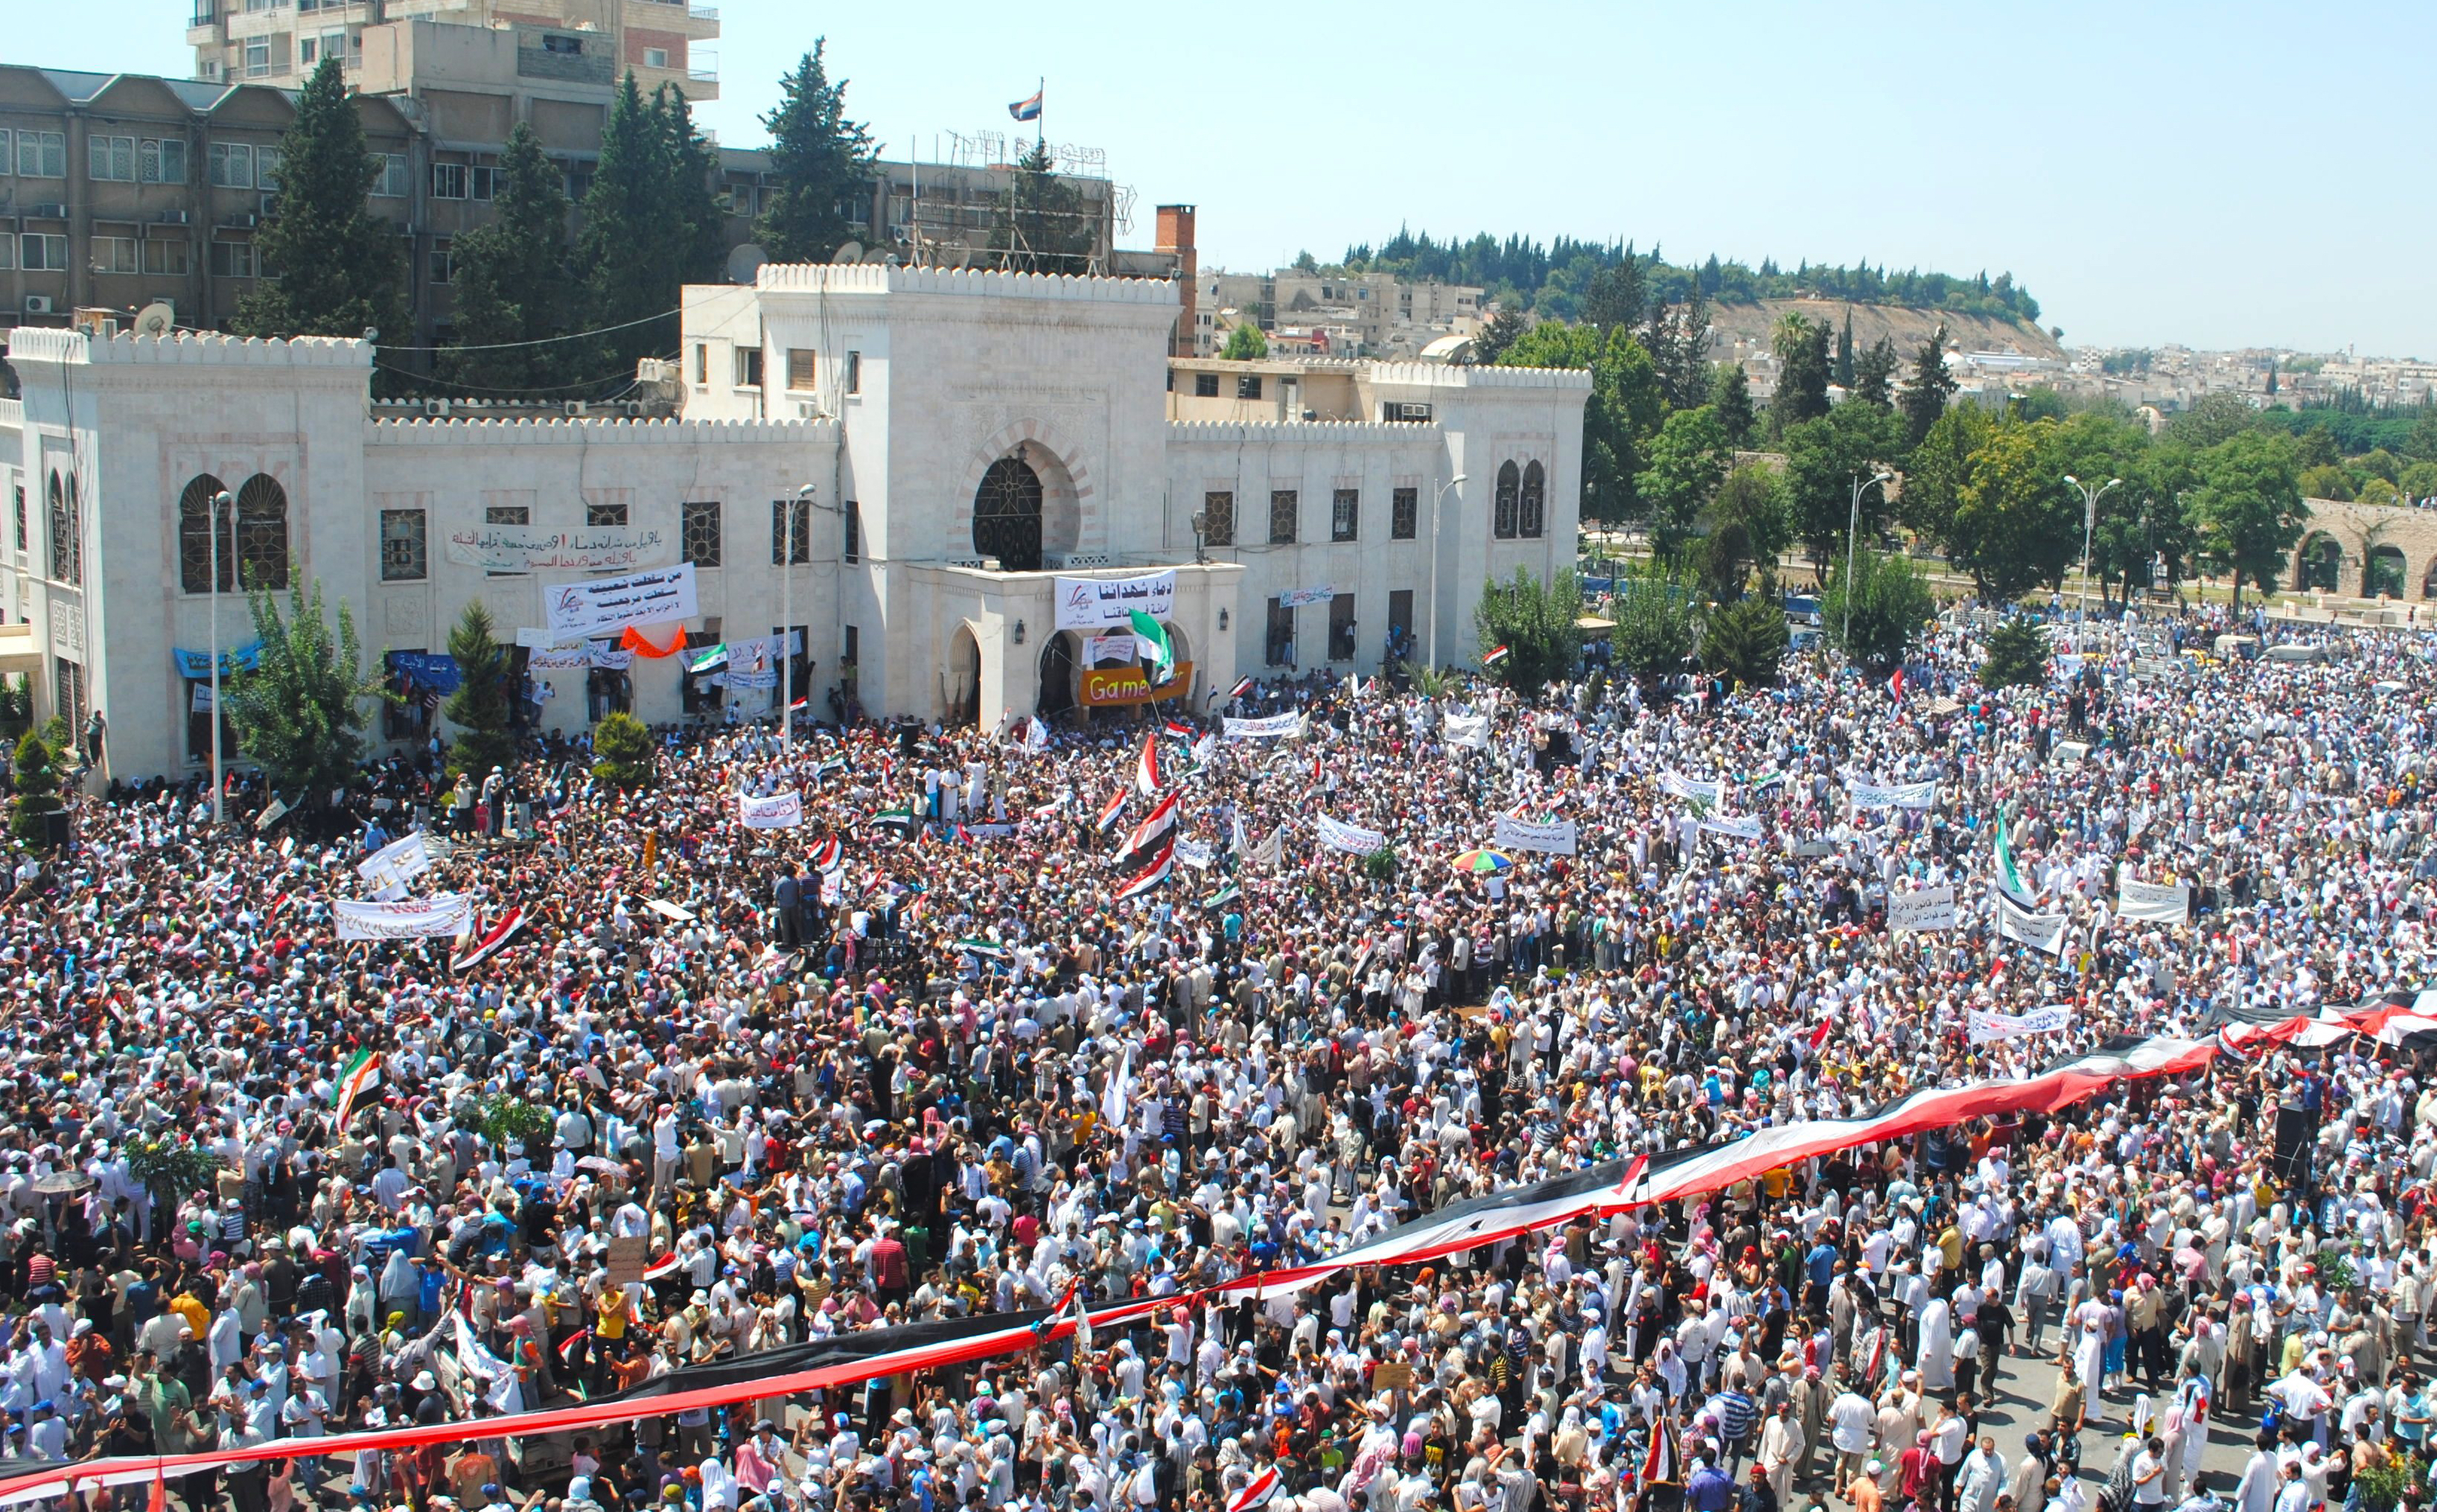 a-large-crowd-protests-in-syrian-town-of-hama-data.jpg